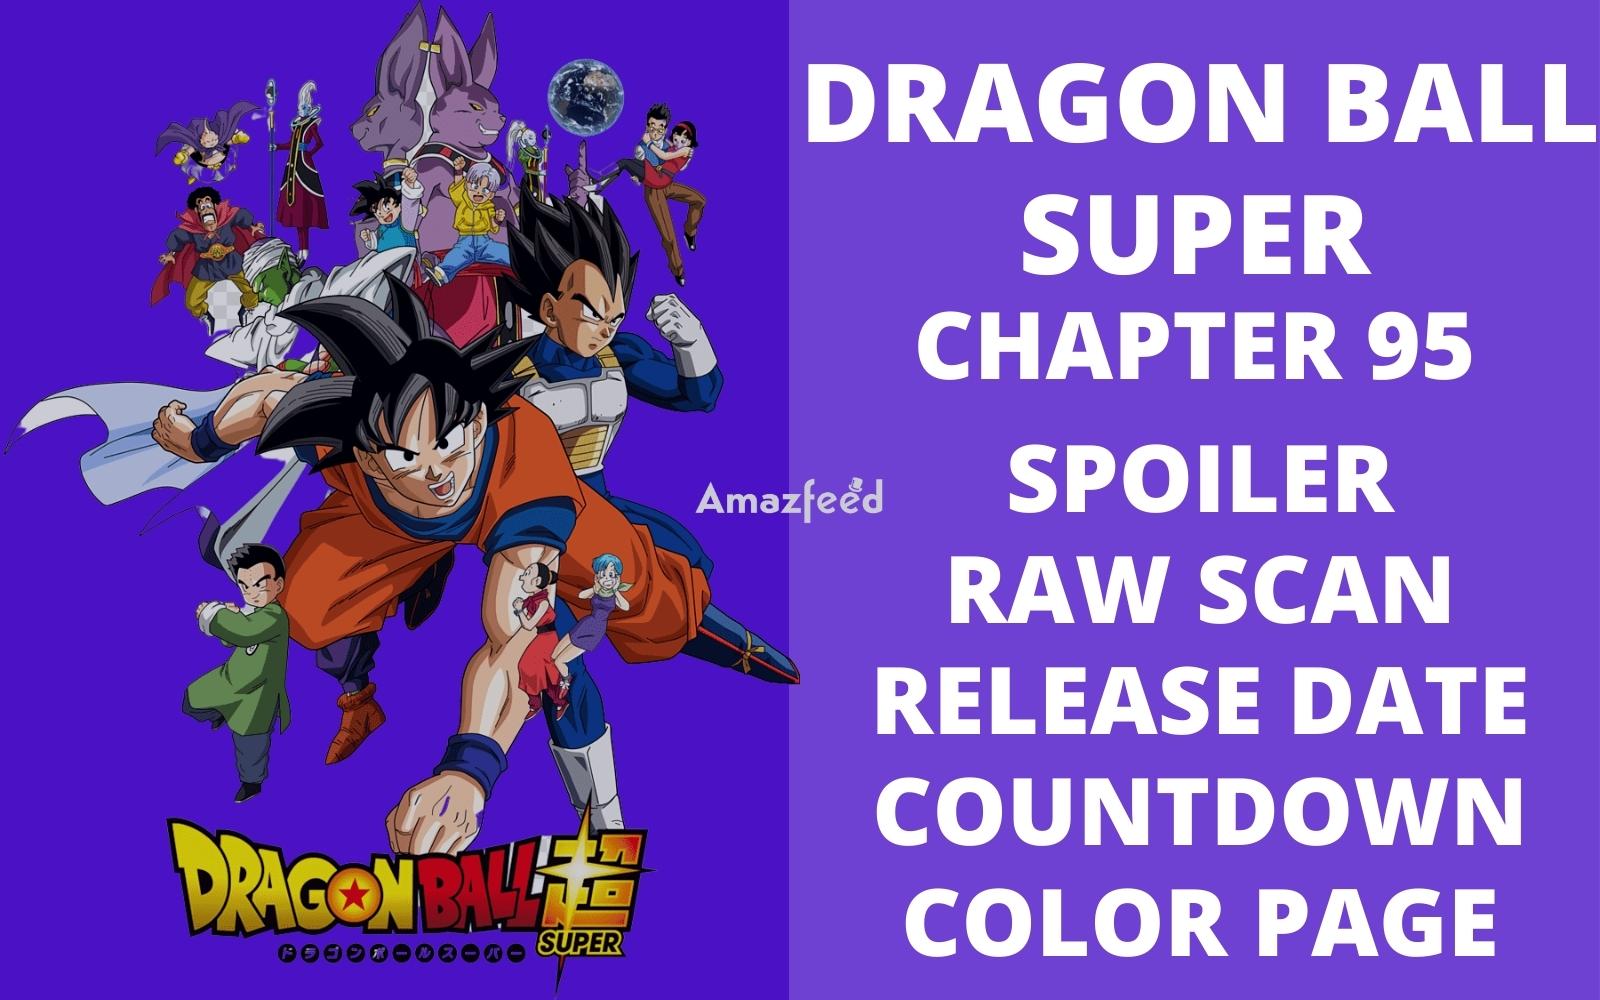 Dragon Ball Super Chapter 95 Spoiler, Raw Scan, Color Page, Release Date